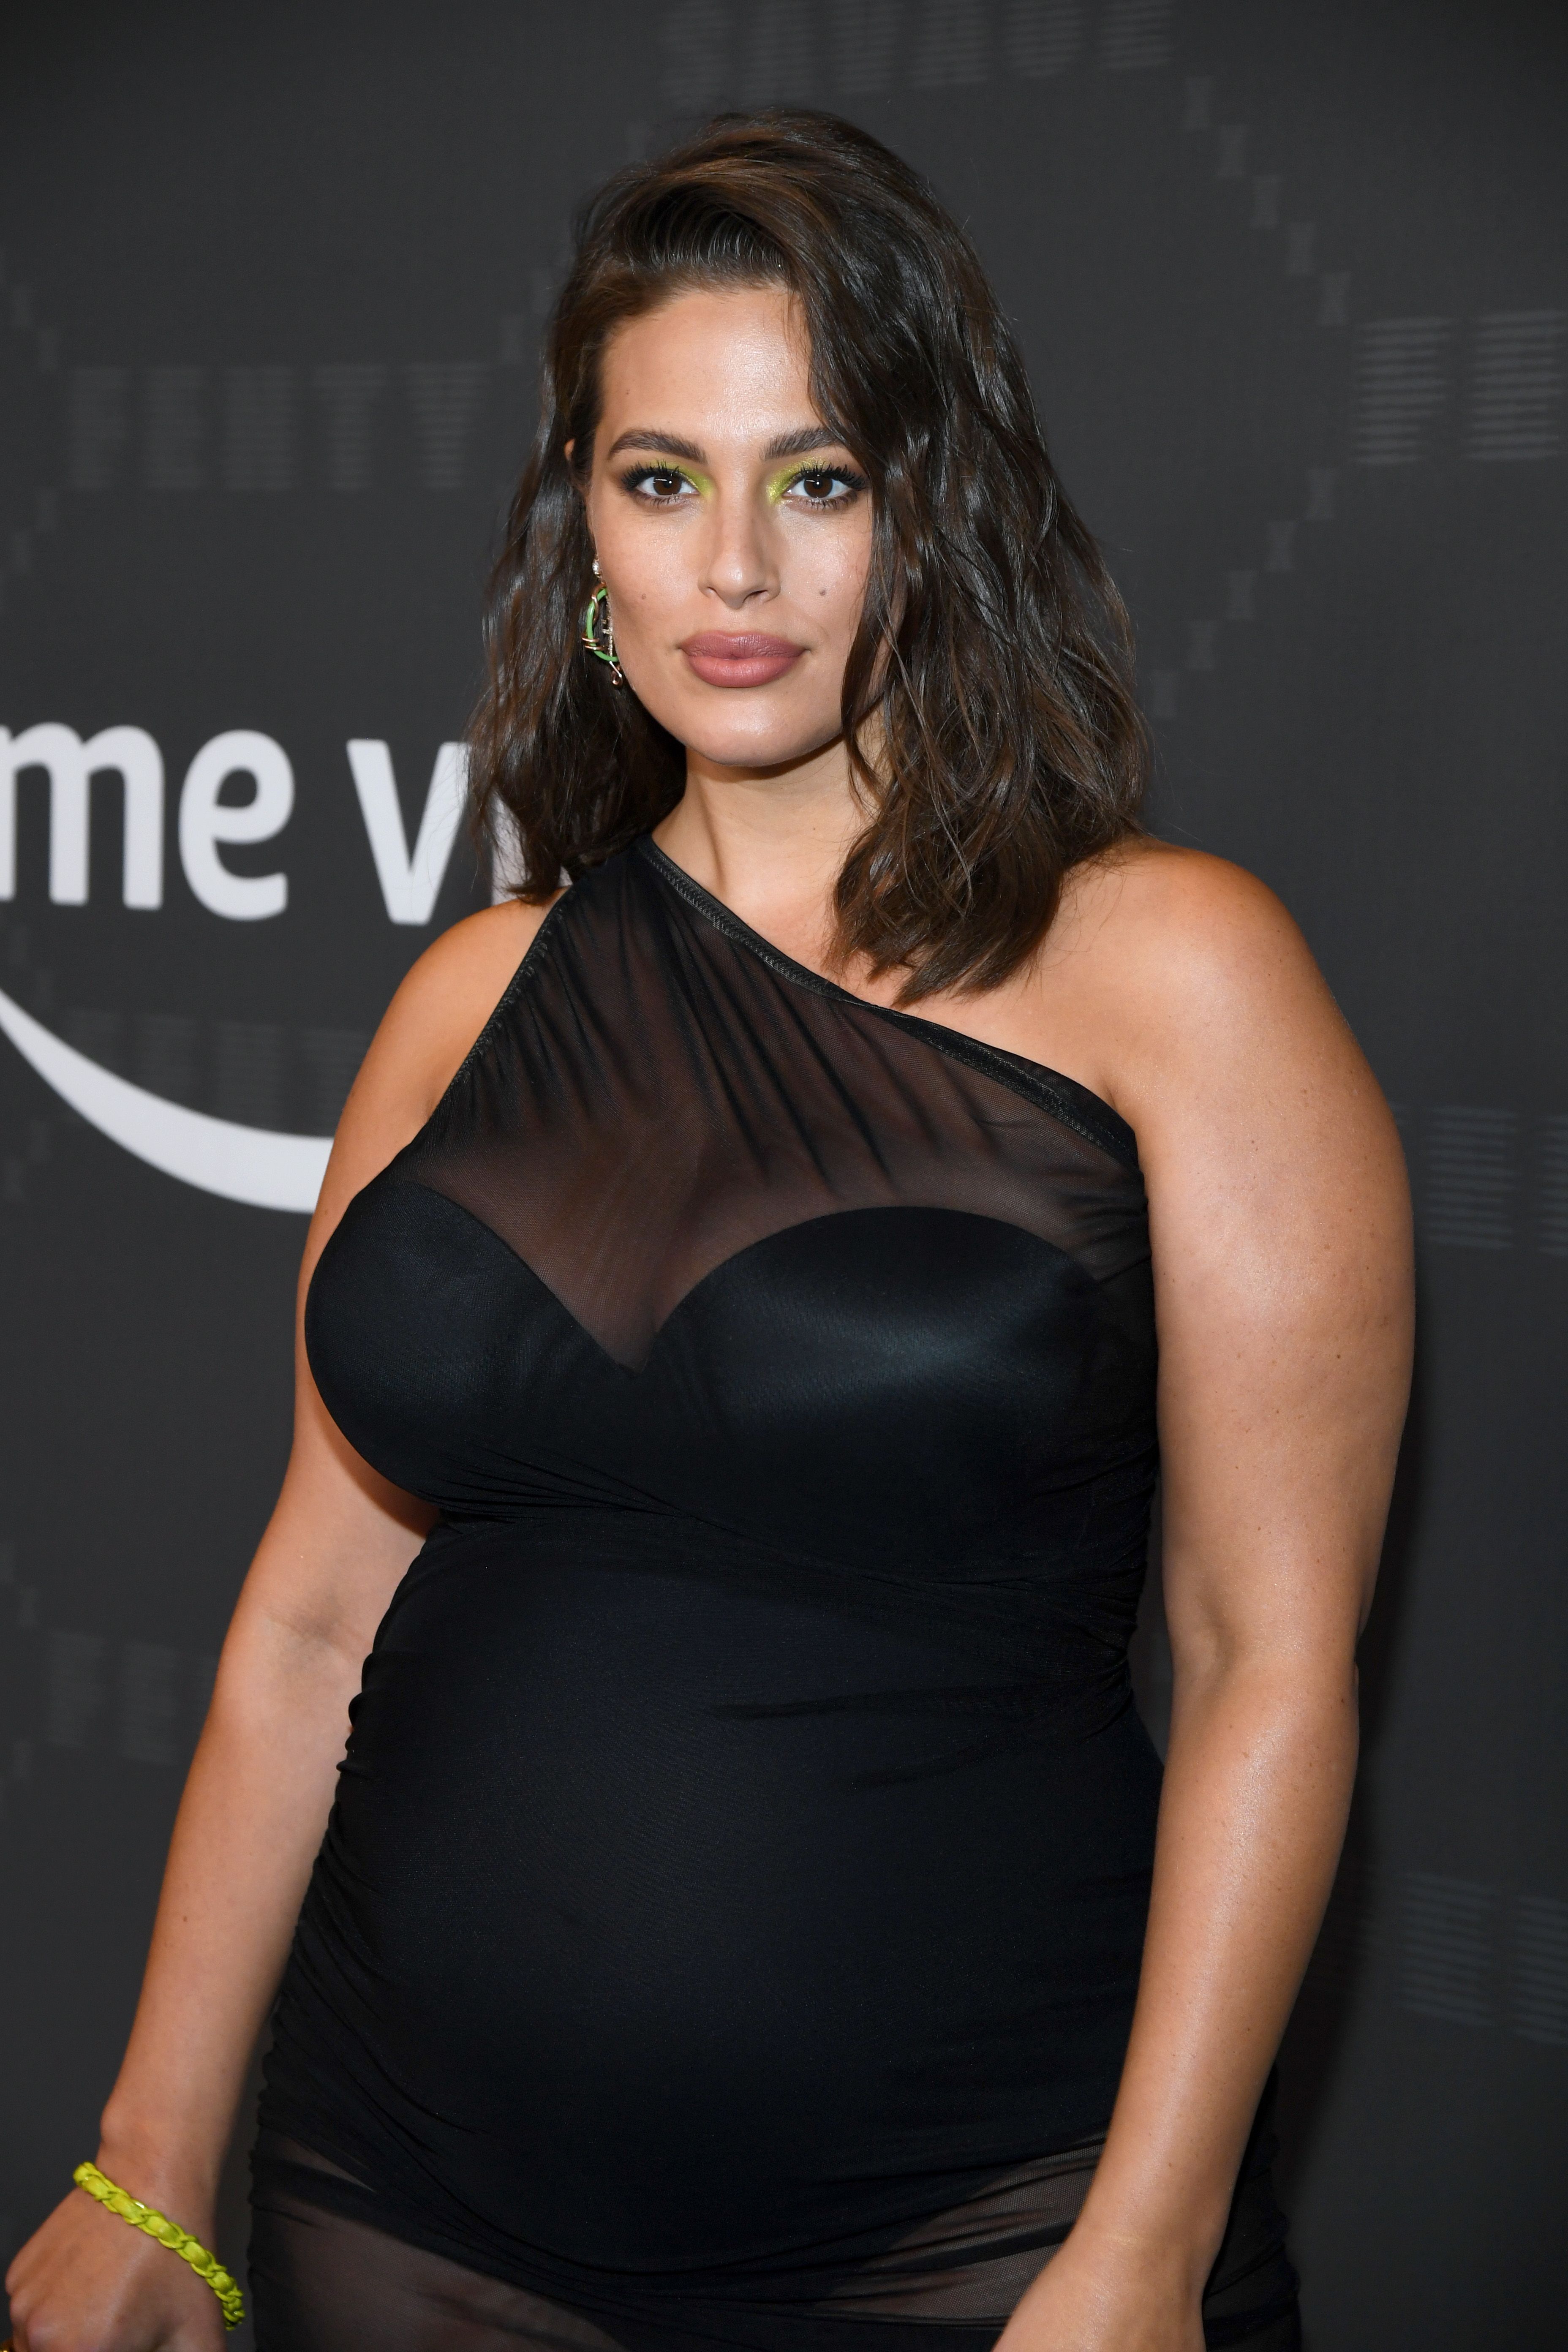 Ashley Graham on the pressure to lose weight by breastfeeding